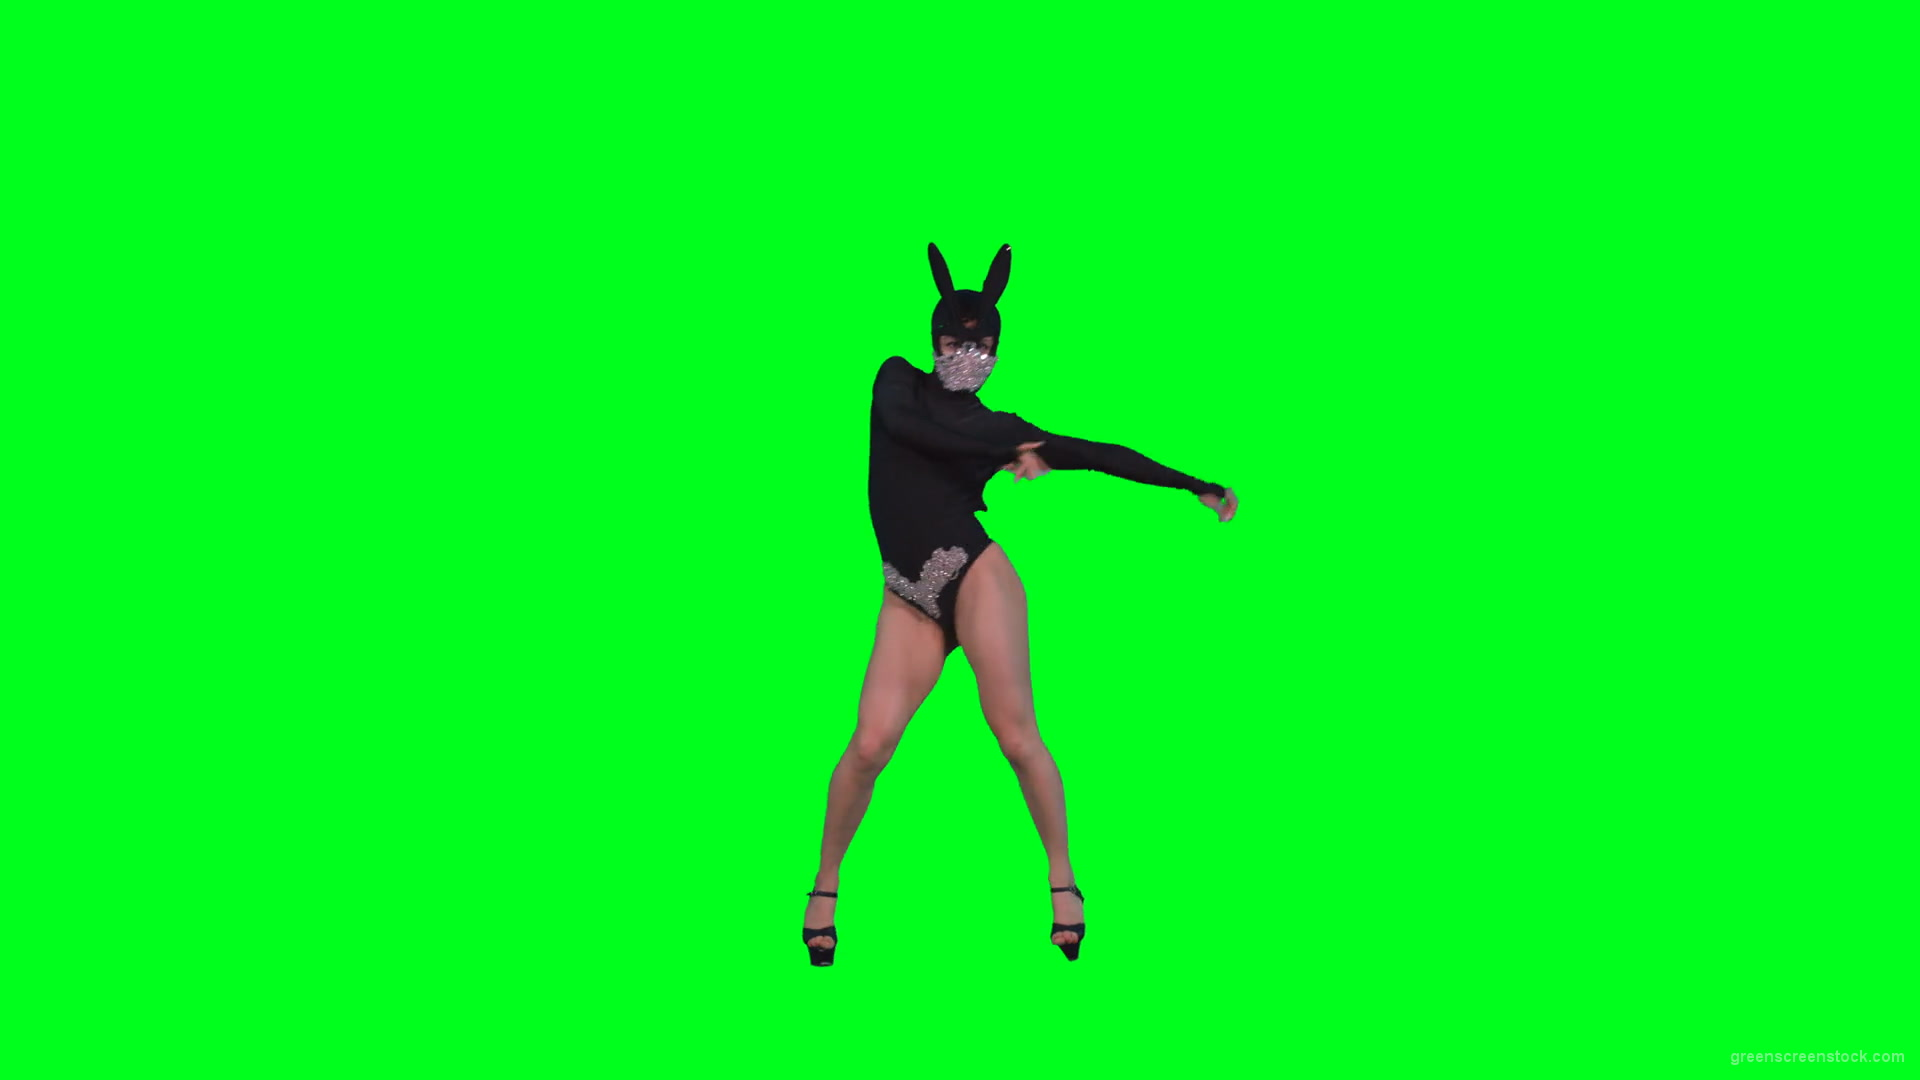 Sexy-dancing-girl-in-rabbit-mask-and-black-fashion-dress-posing-in-fetish-style-isolated-on-green-screen-4K-Video-Footage-1920_002 Green Screen Stock